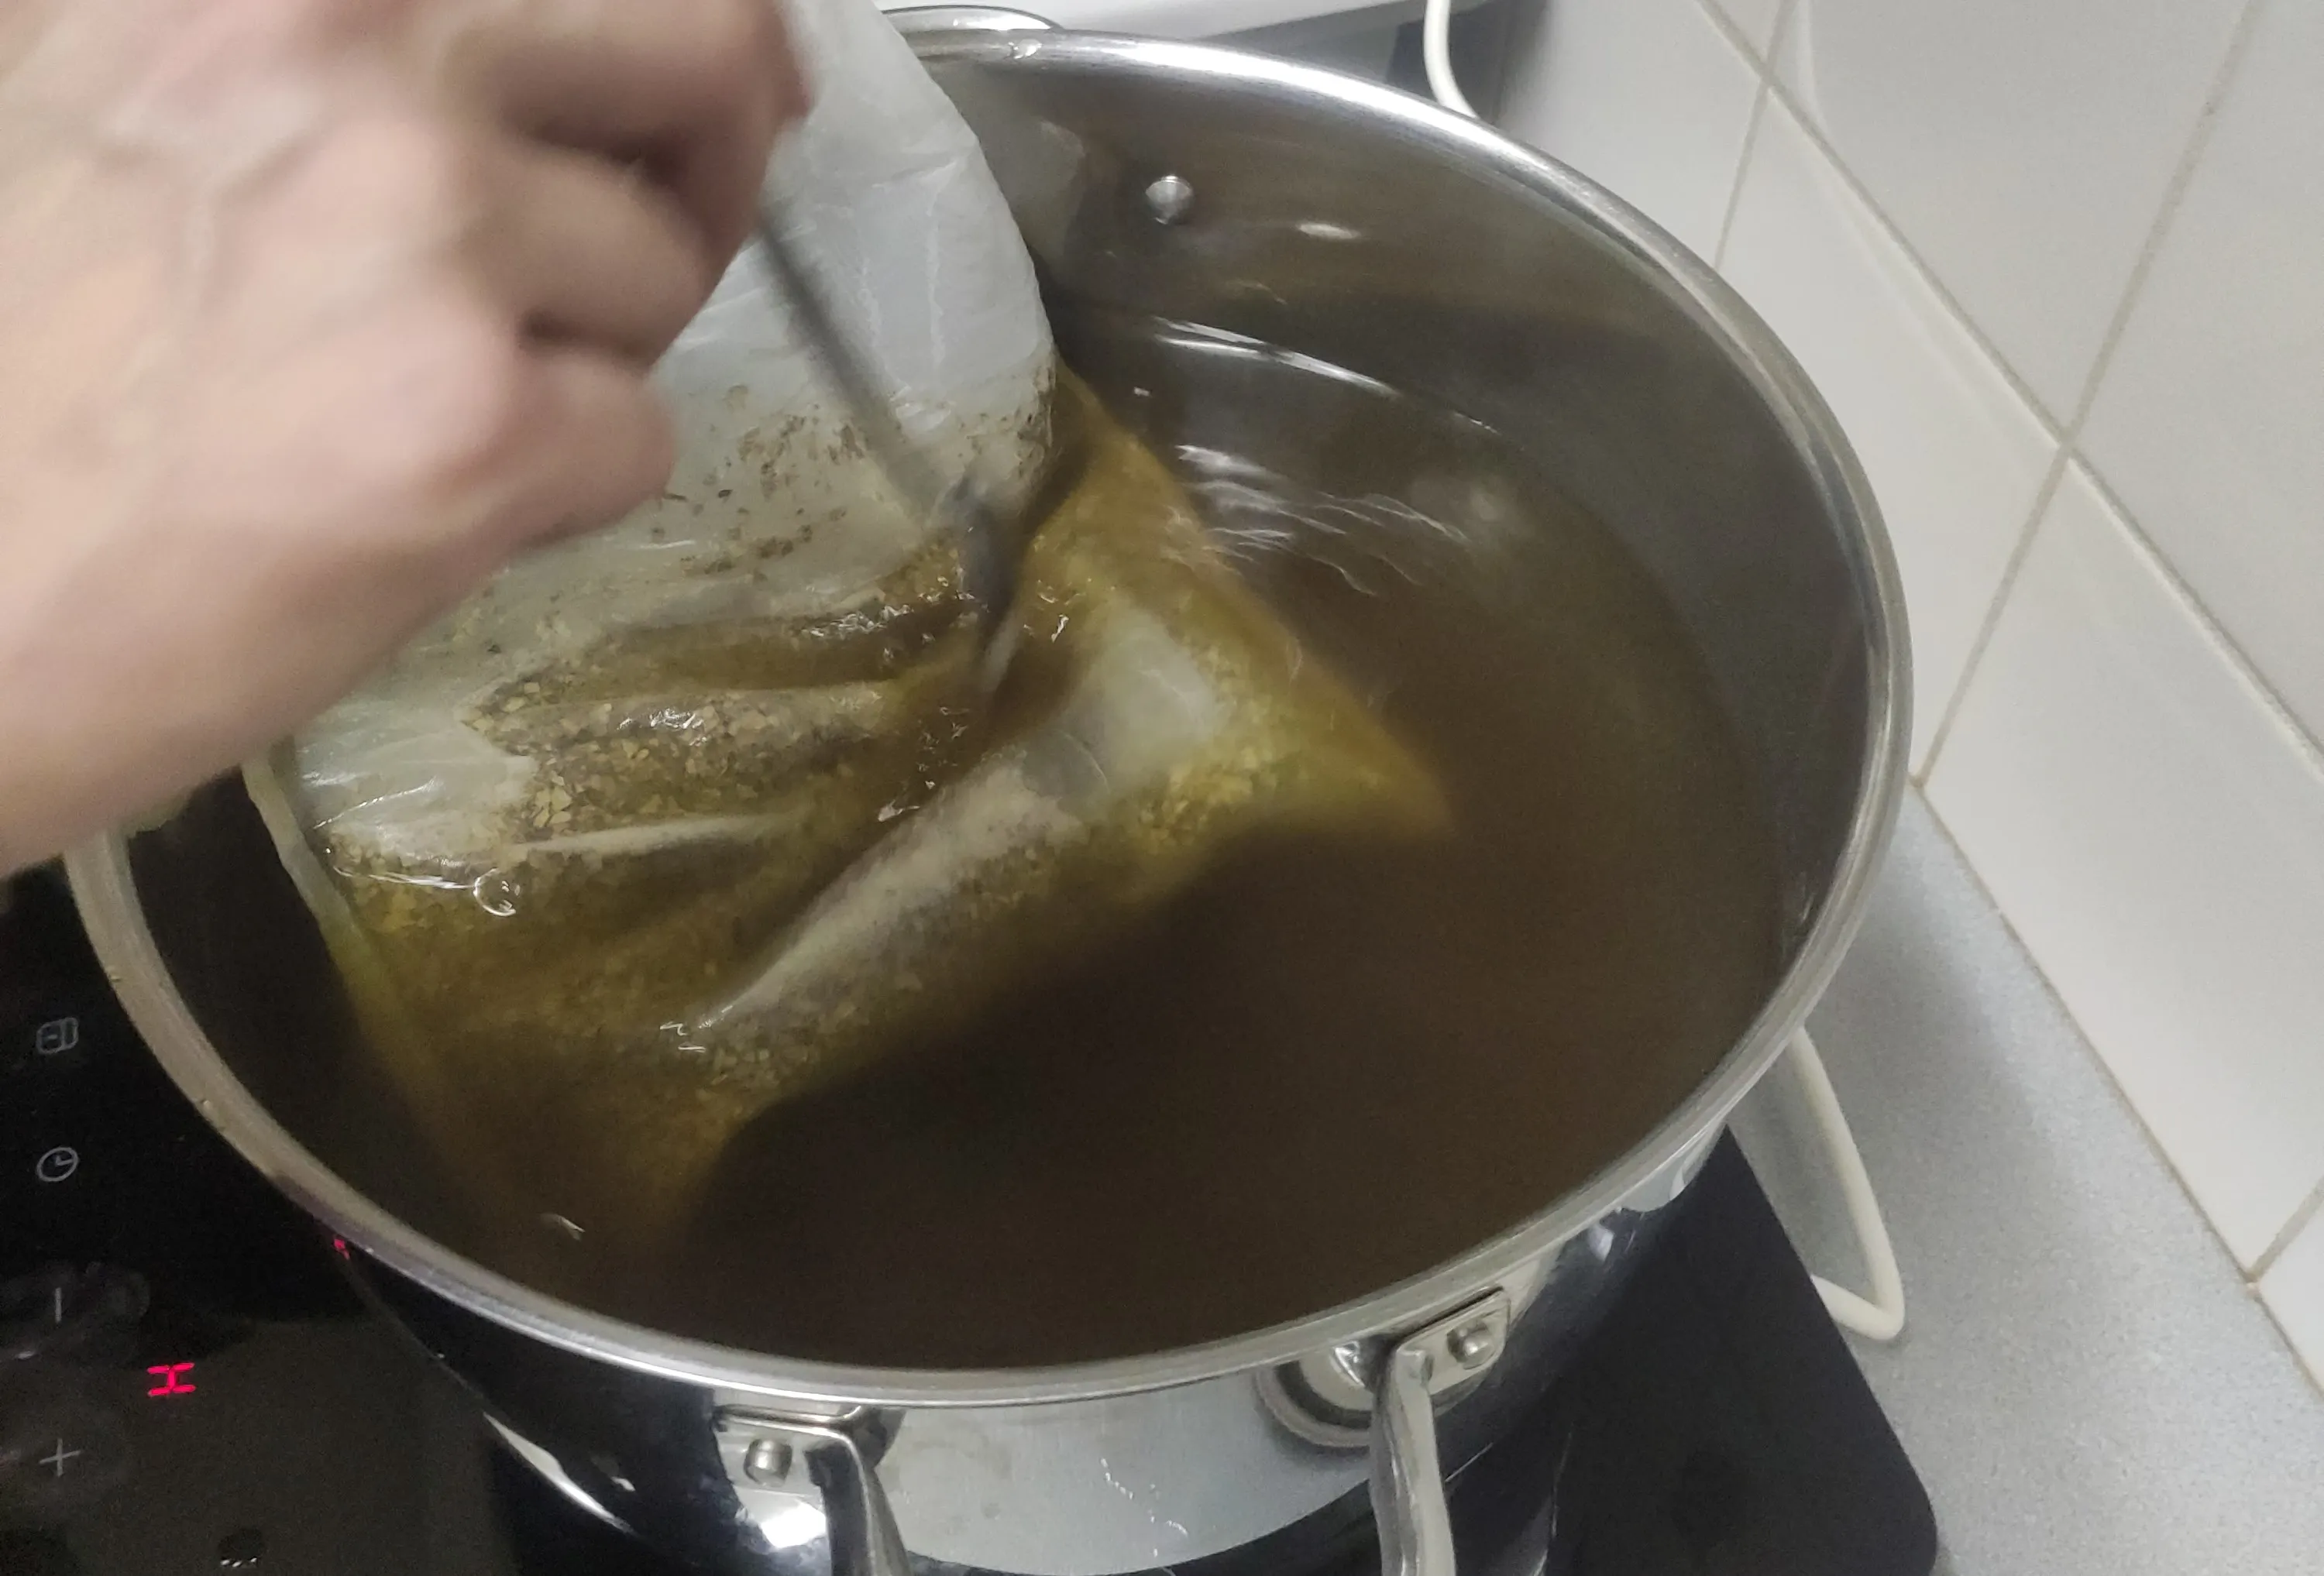 The tea being created